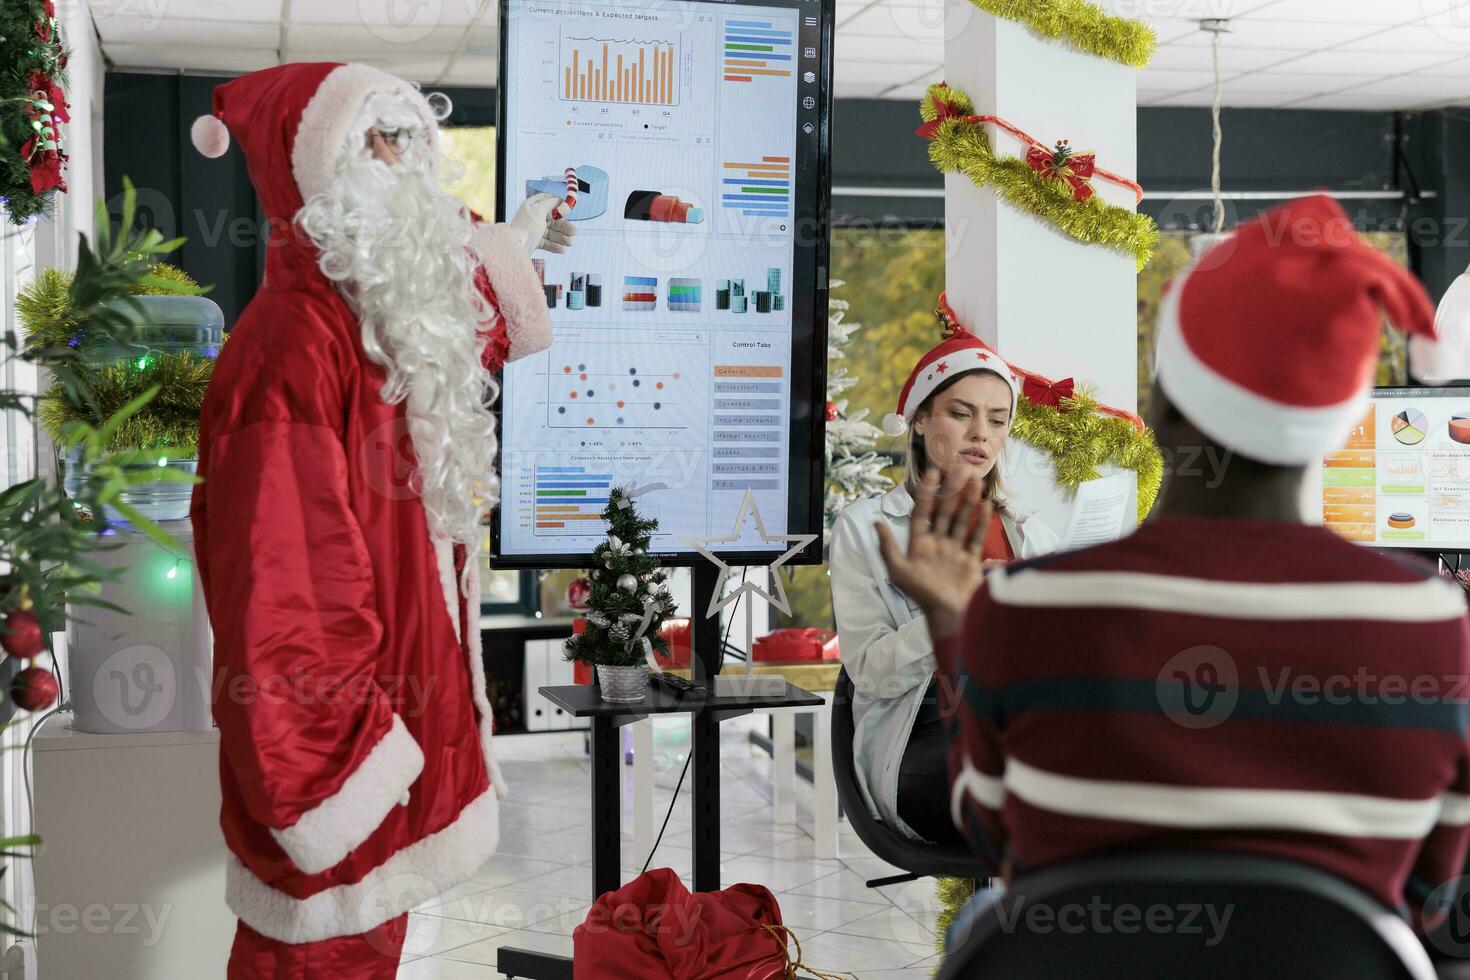 Licensed expert dressed as Santa Claus inspiring businessmen to advance their careers in Christmas adorn office. Coworkers attending business meeting learning skills during winter holiday season photo